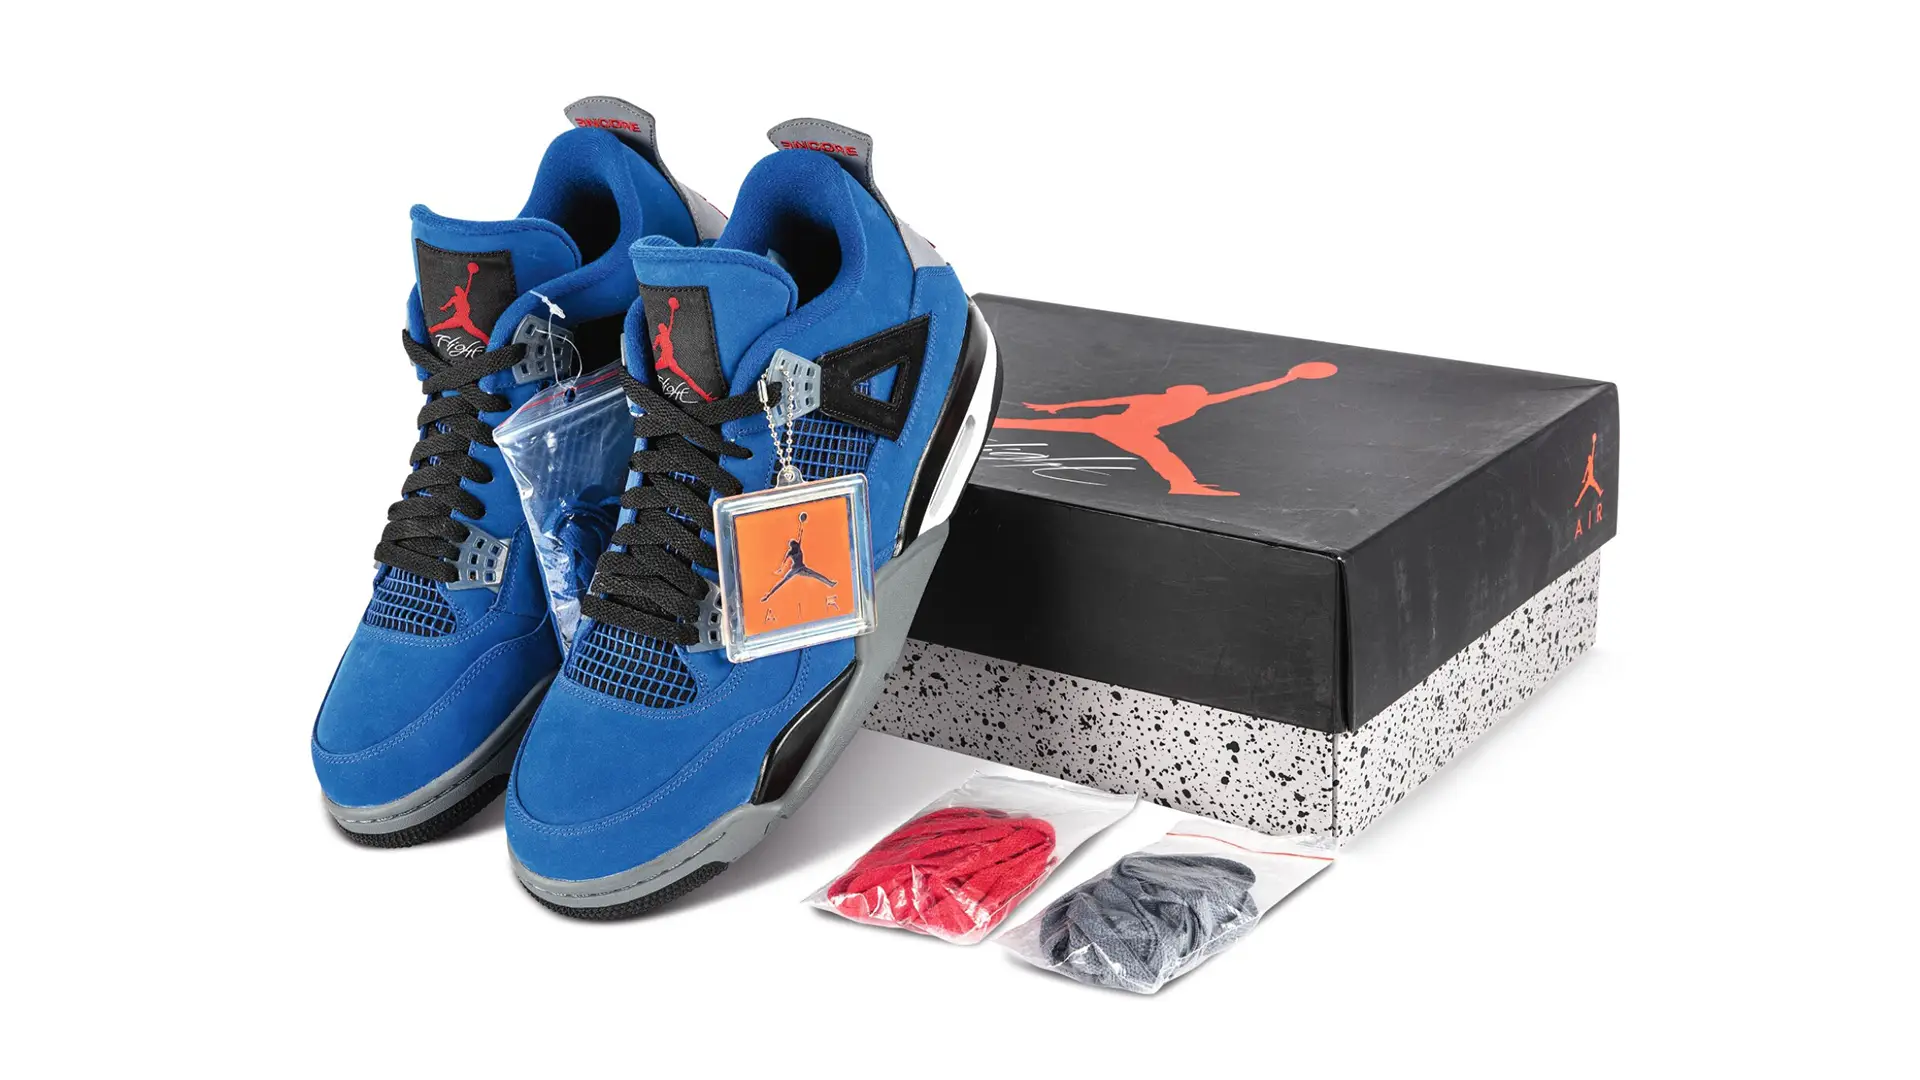 5 most expensive Air Jordan 4 sneakers of all time